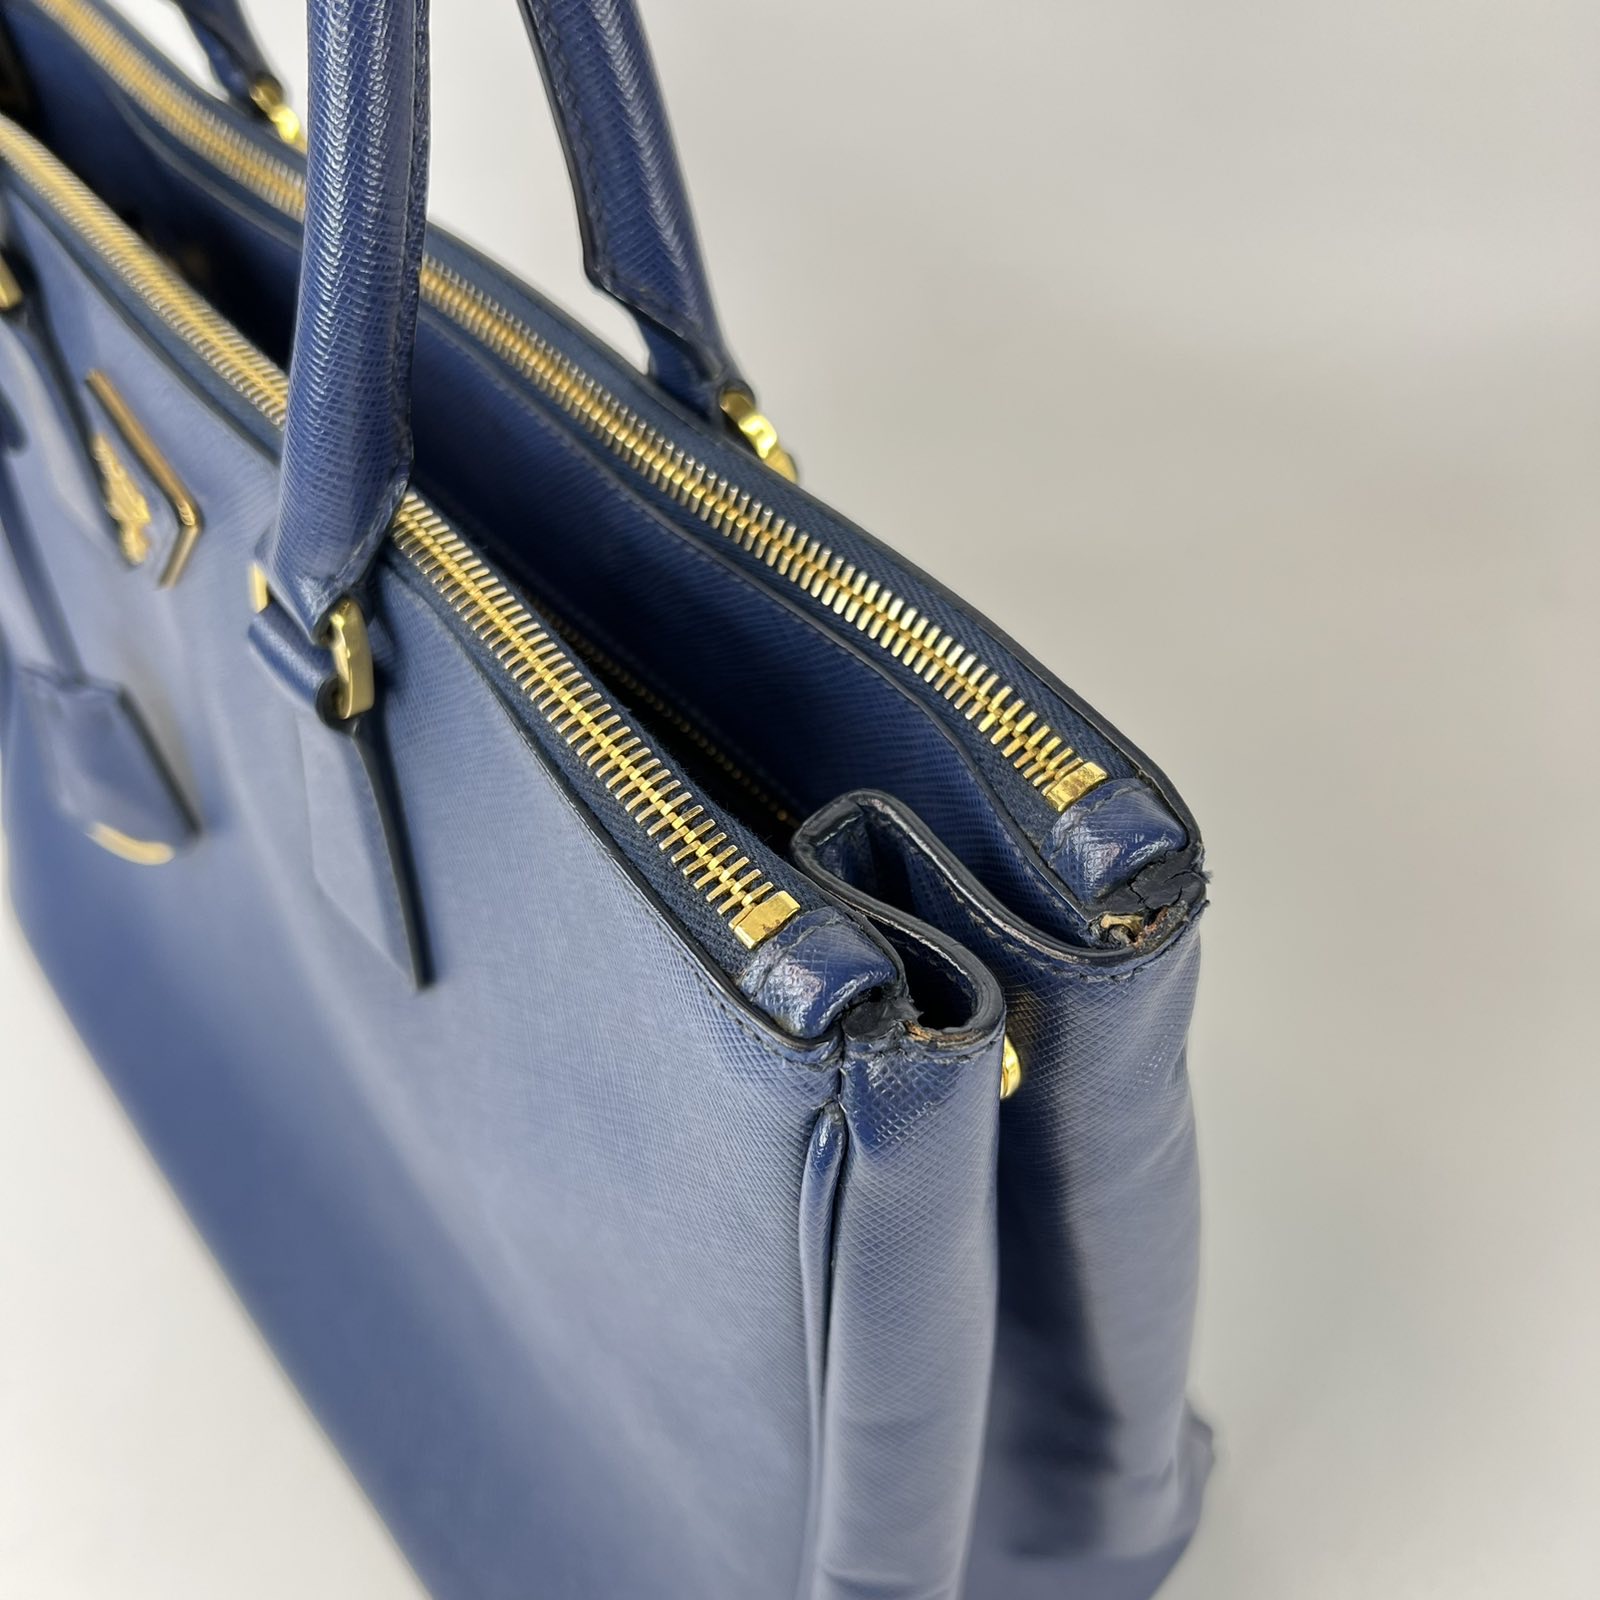 Prada Blue Saffiano Leather Lux Tote Bag with Gold Hardware. Very, Lot  #20149